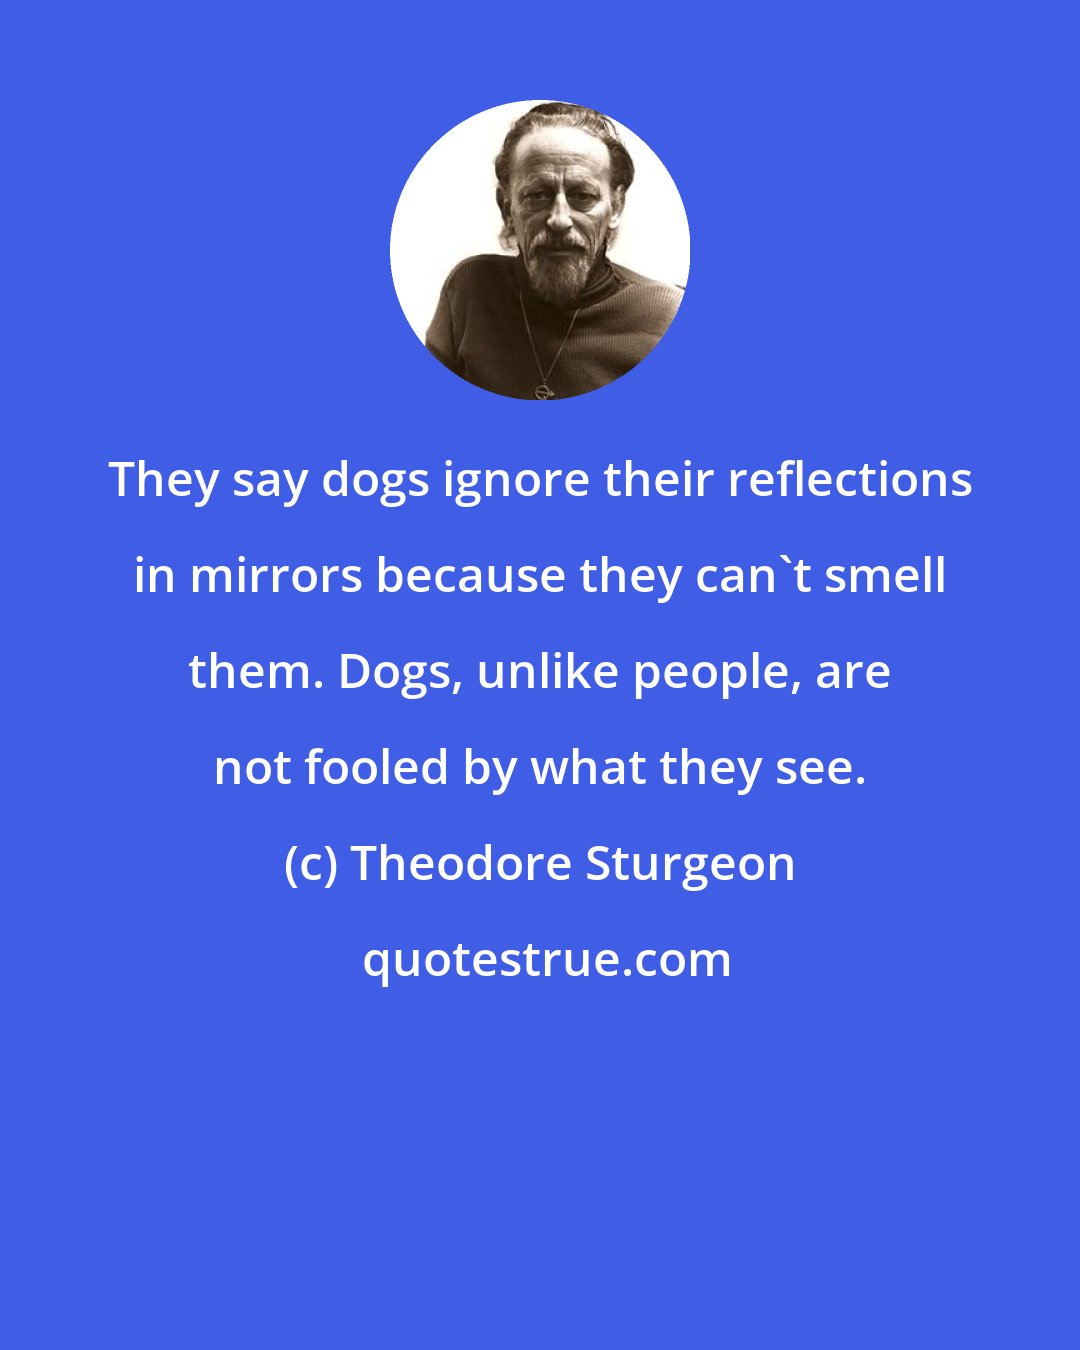 Theodore Sturgeon: They say dogs ignore their reflections in mirrors because they can't smell them. Dogs, unlike people, are not fooled by what they see.